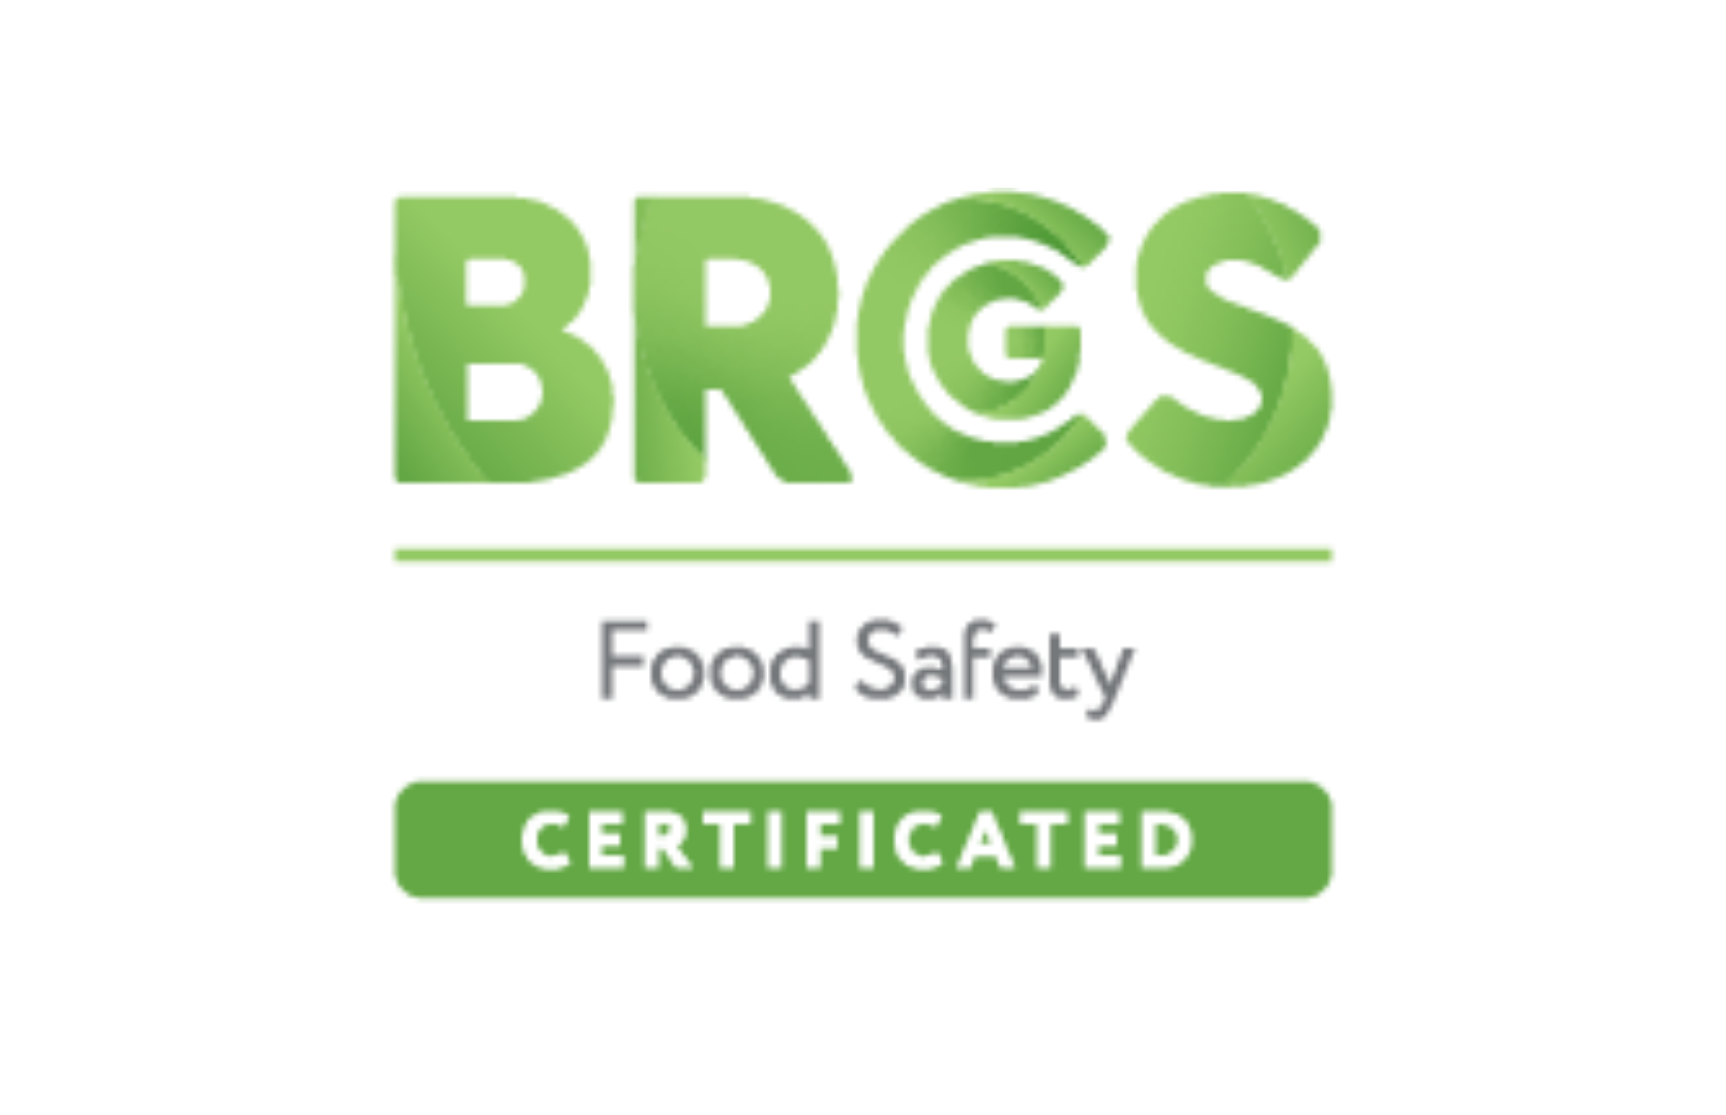 Digital green certificate design with the word "BRCGS certificated" visible.